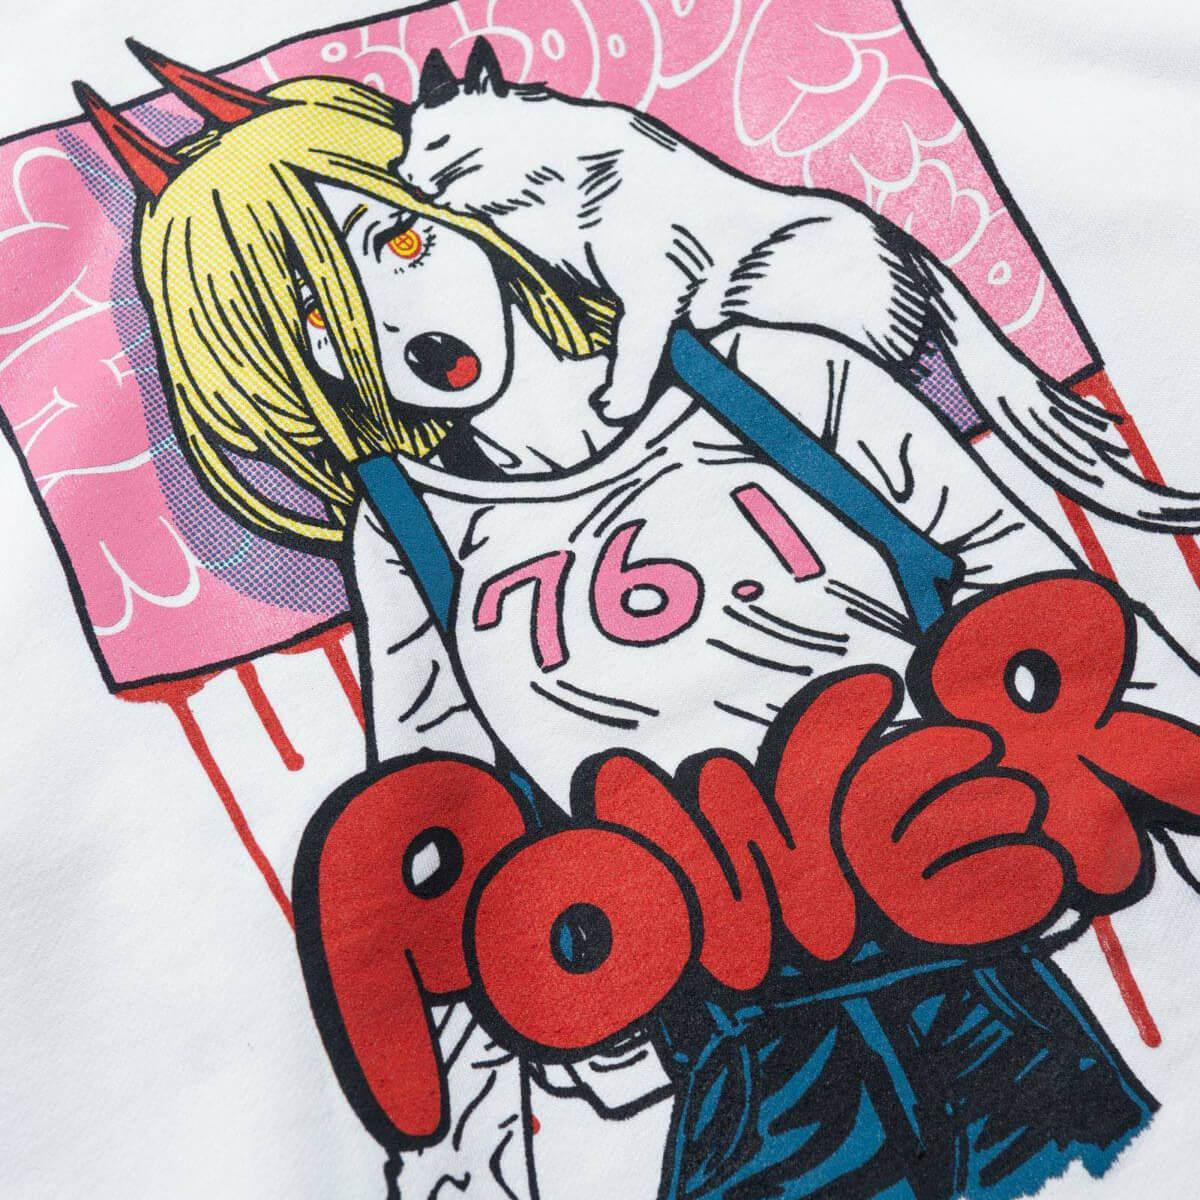 Chainsaw Man Power and Meowy Hoodie - Aesthetic Clothes Shop